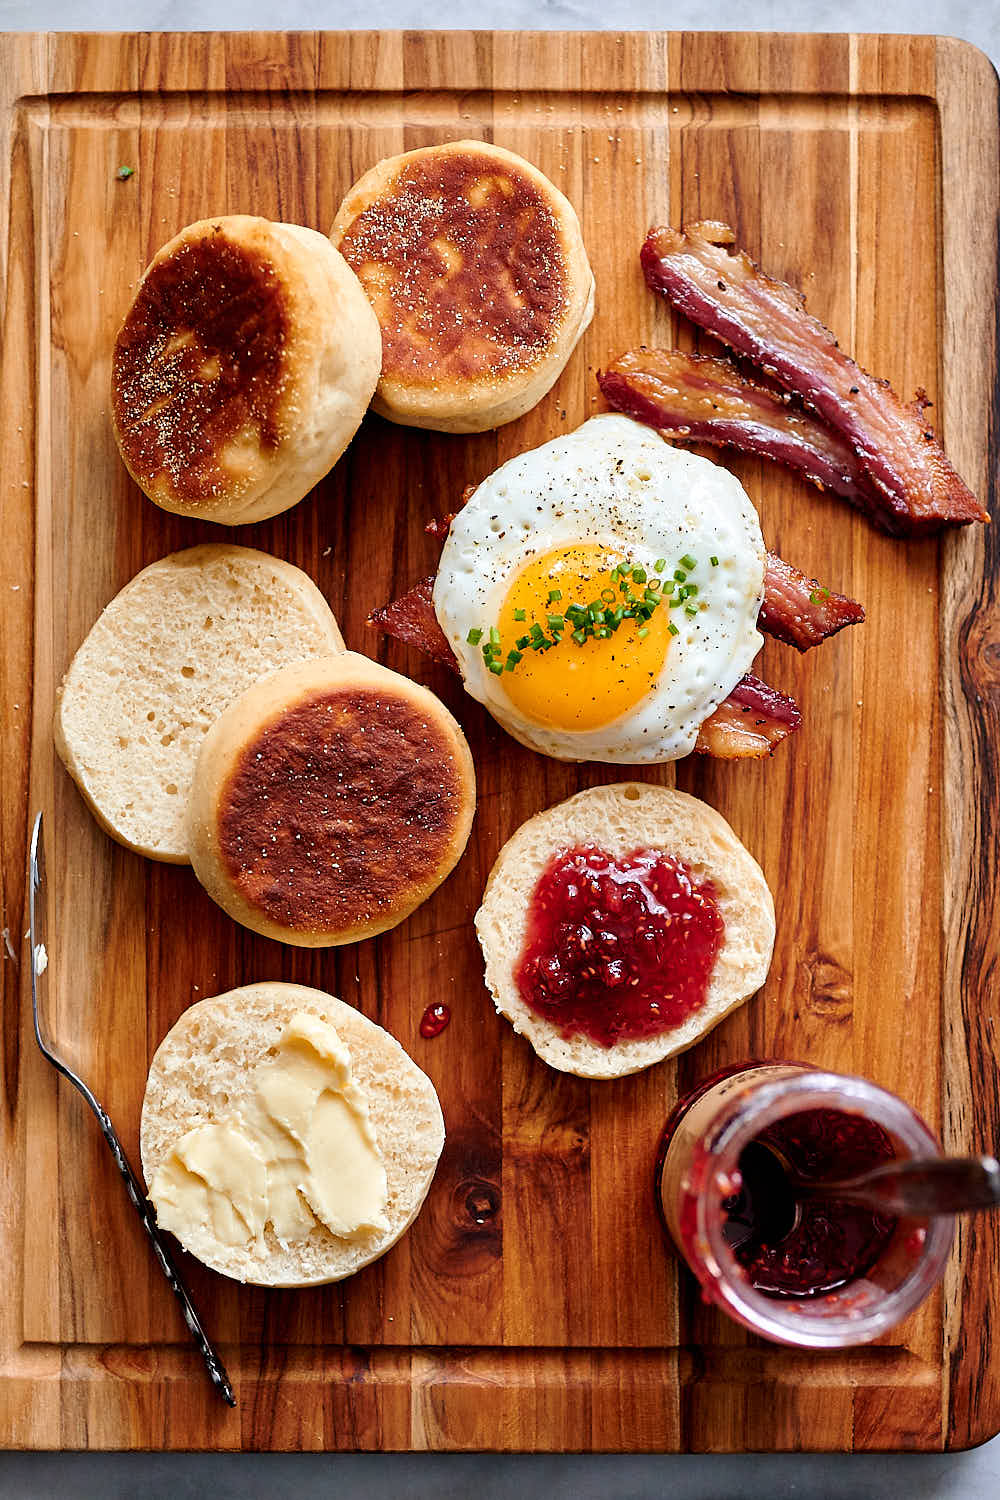 Sourdough English muffins with jam and butter